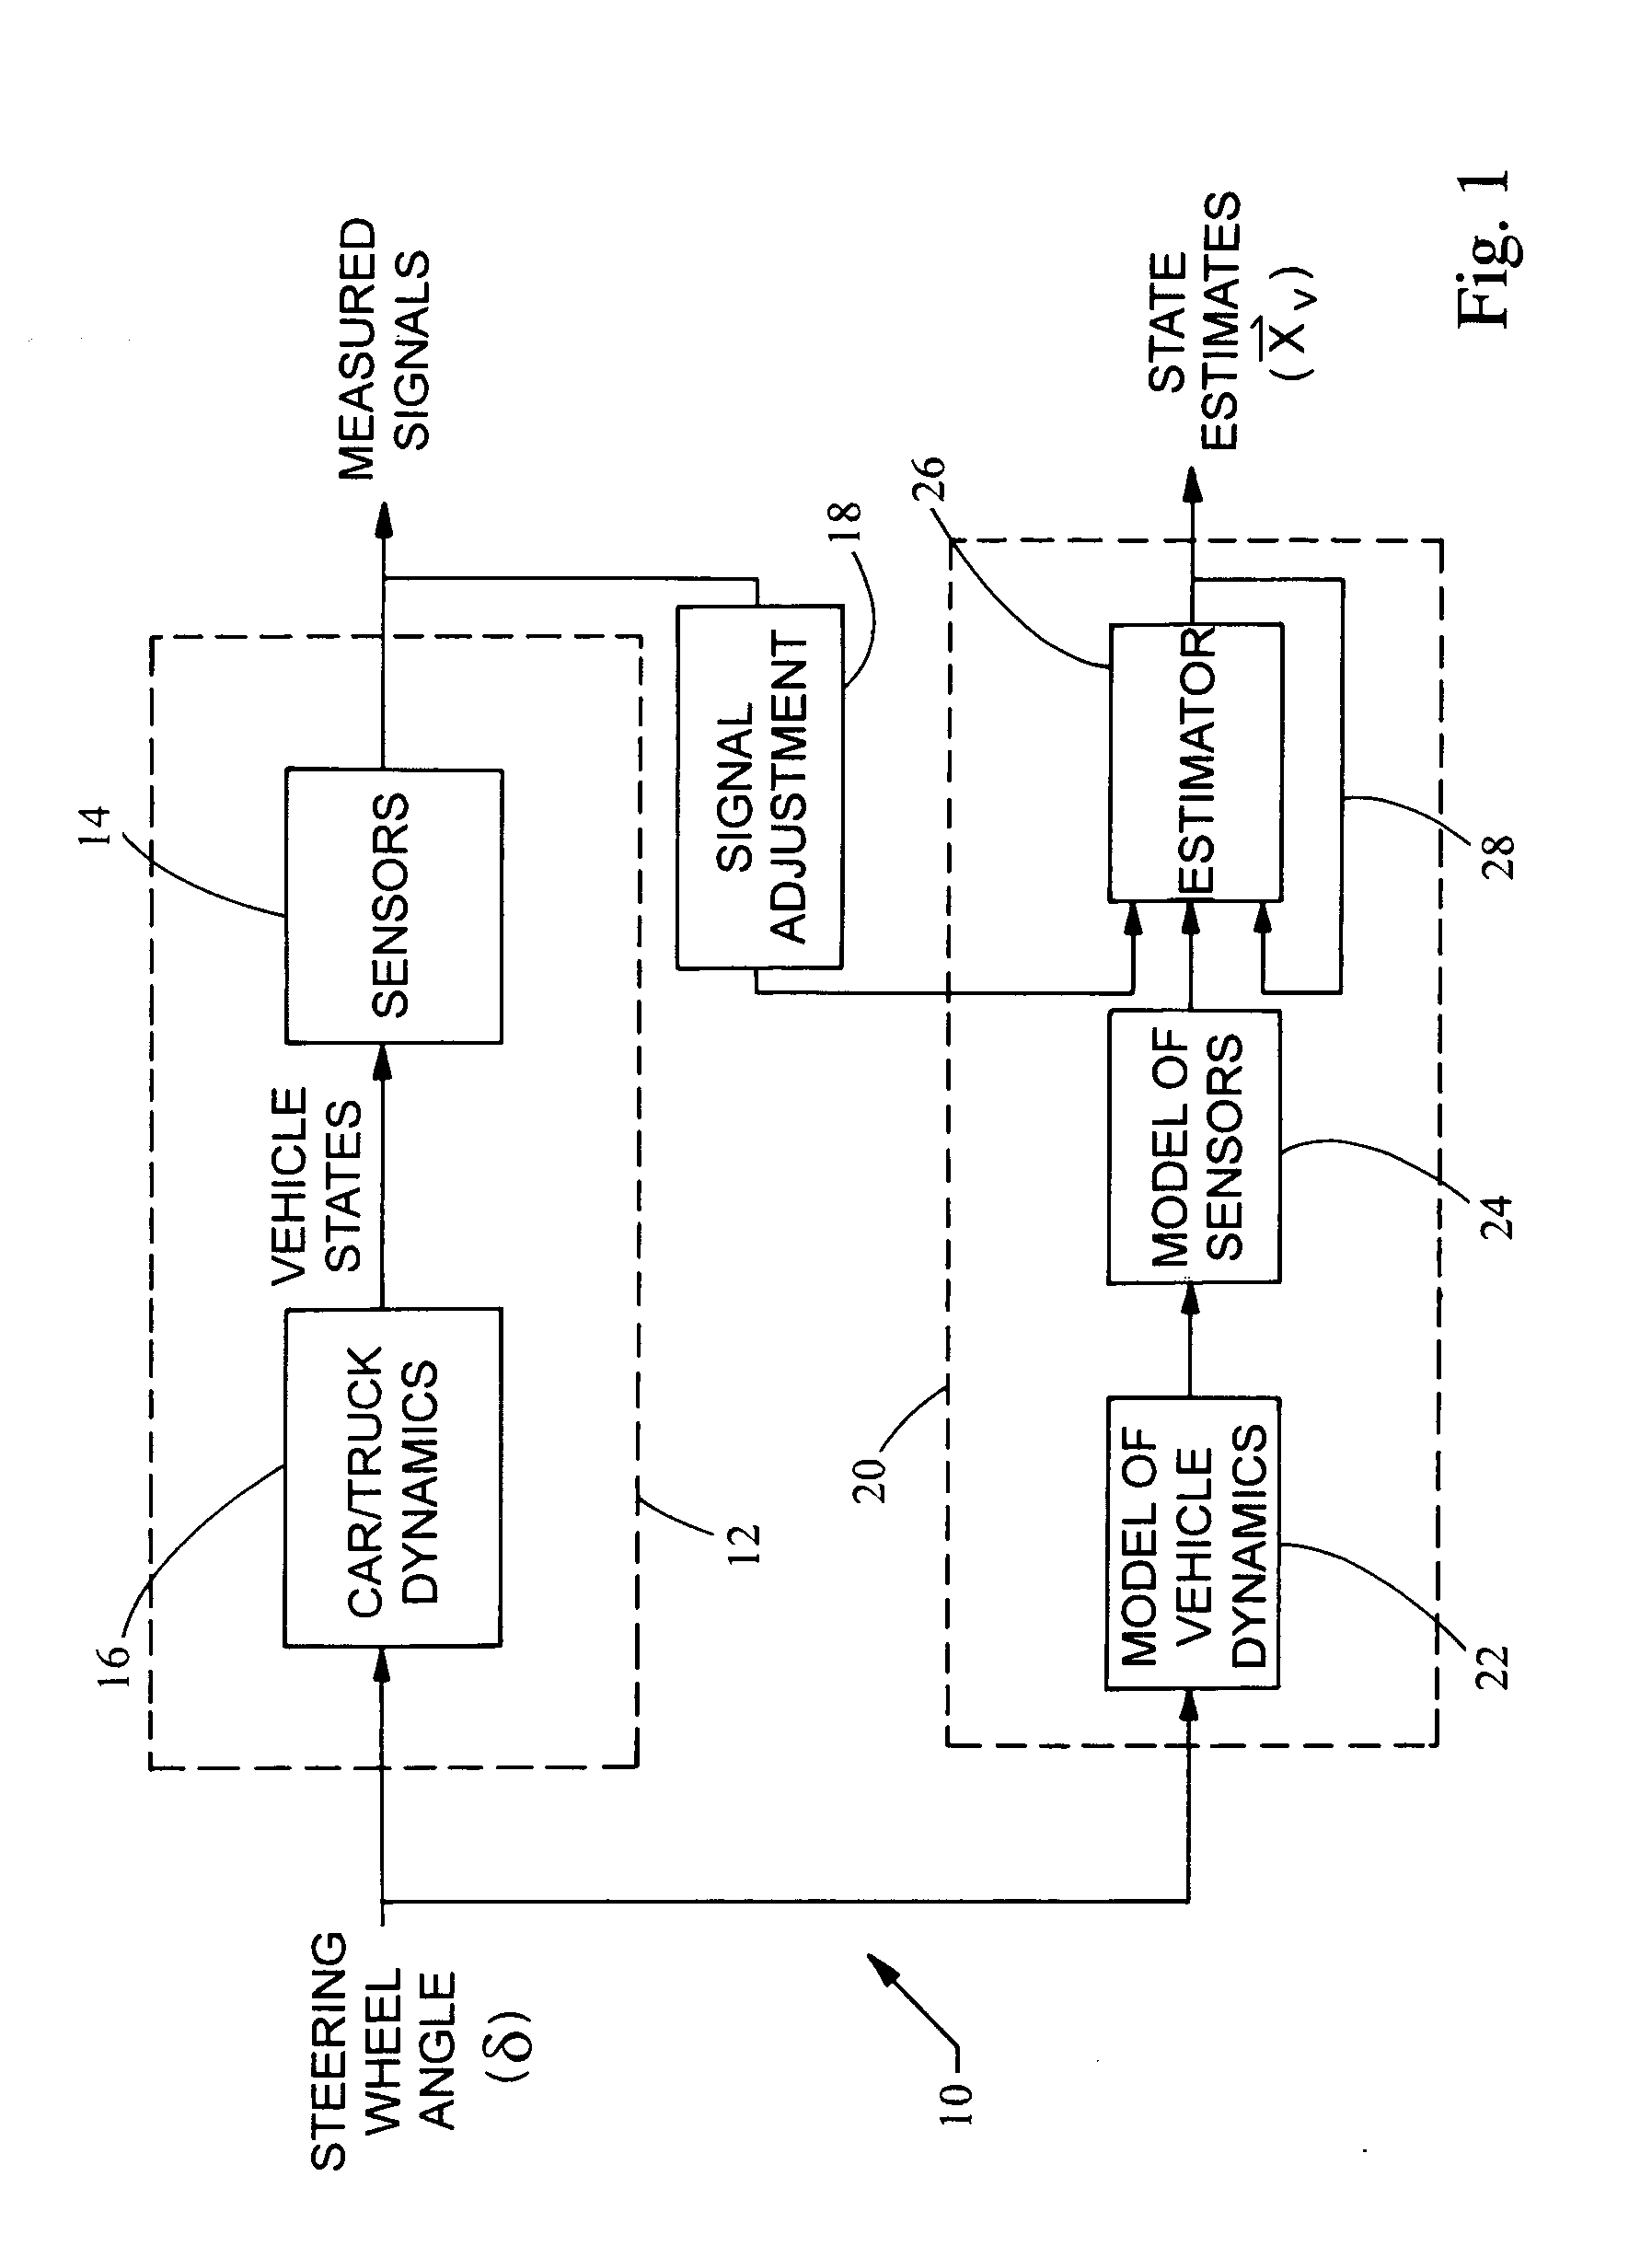 Body state estimation of a vehicle